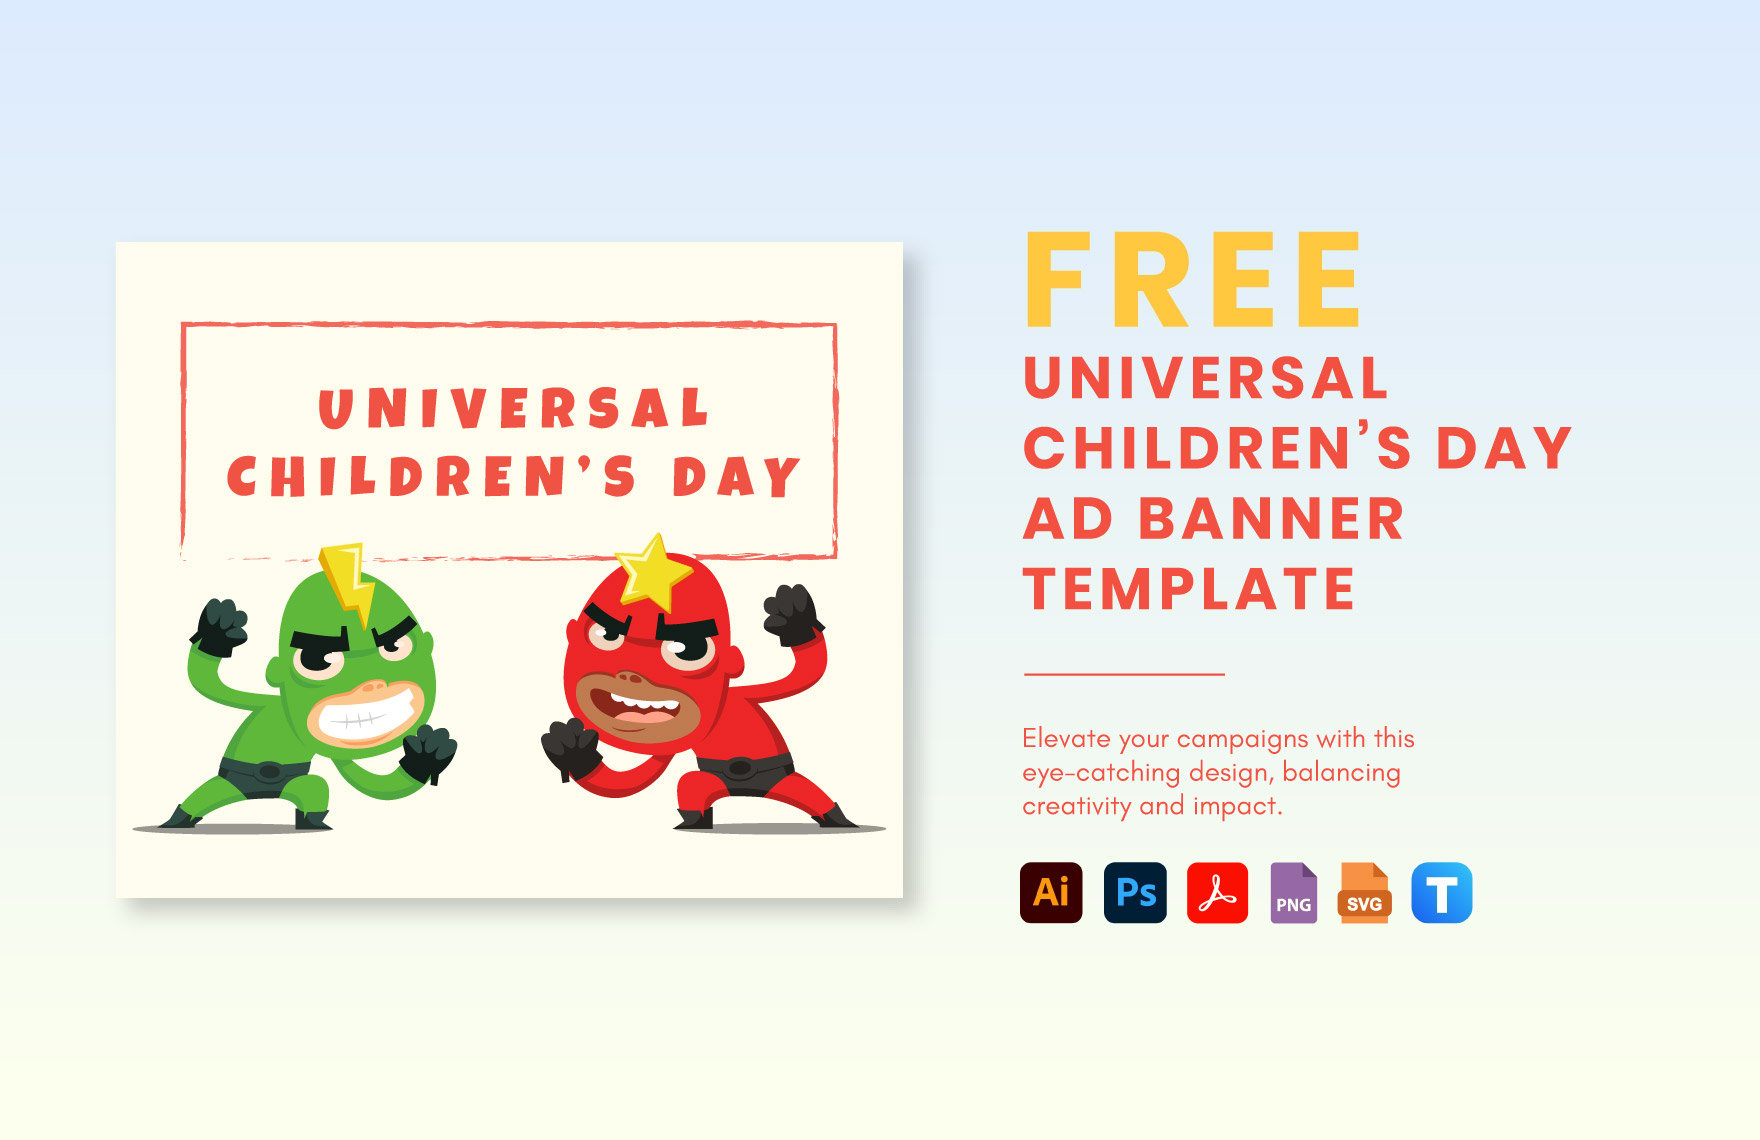 Free Universal Children’s Day Ad Banner Template in PDF, Illustrator, PSD, SVG, PNG